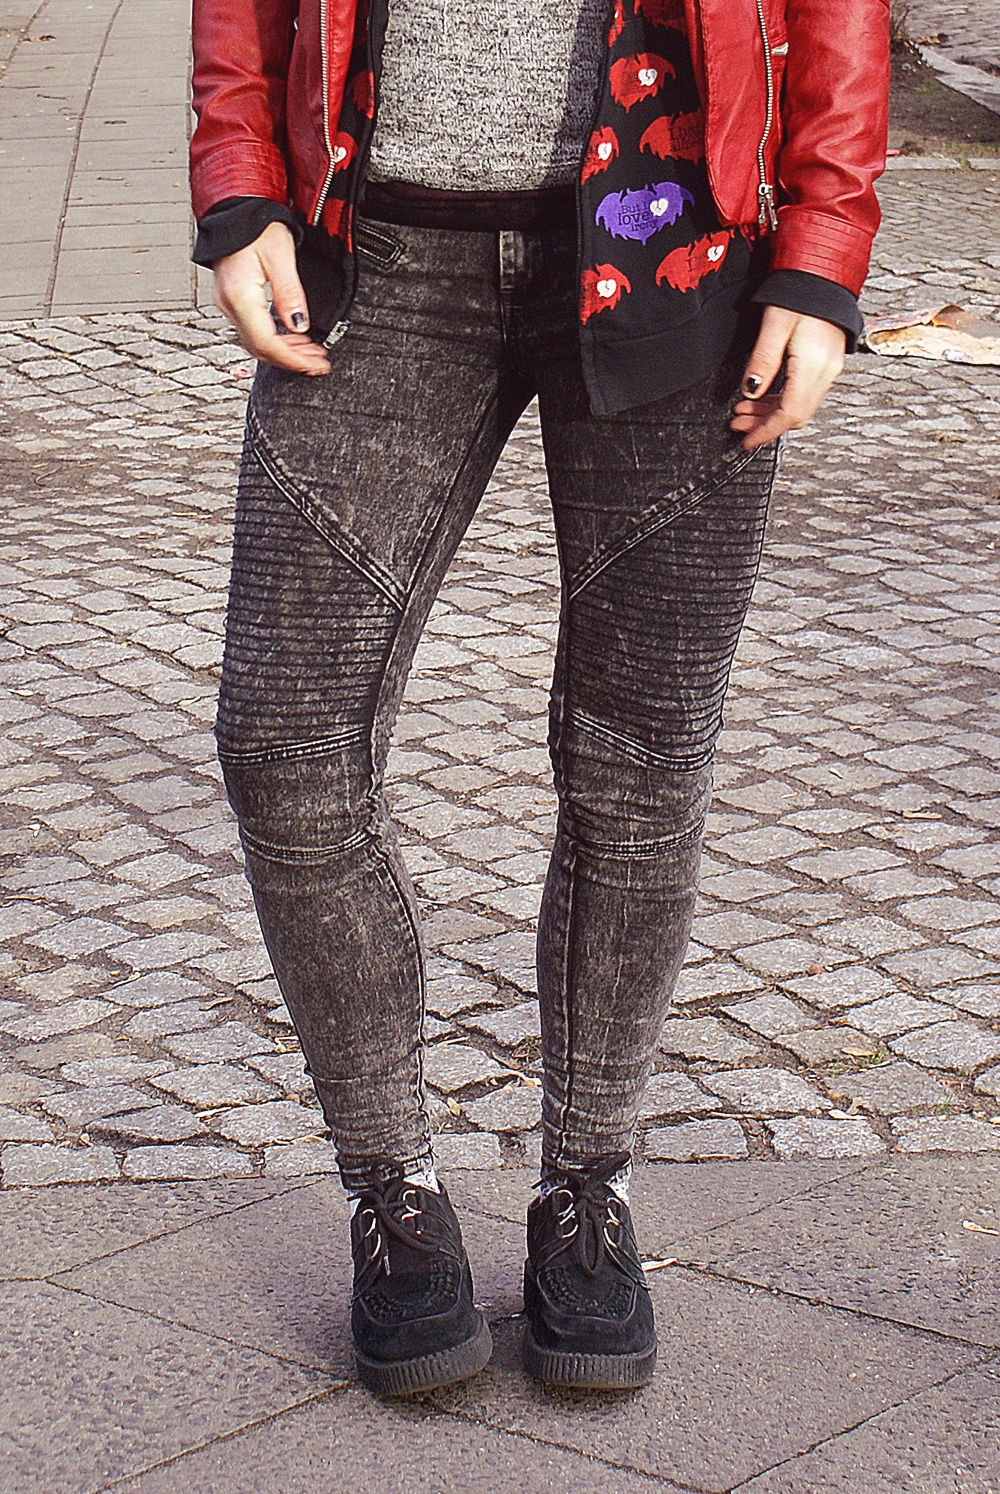 outfit, altfashion, alternative, punk, street, grey, divided, h&m, moto, jeans, biker, boots, street super shoes, sacha, clandestine industries, fall out boy, pete wentz, i love irony, creepers, underground, creeper, rot, red, lederjacke, beanie, nieten, spikes, winter, strick, herbst, knit, all over